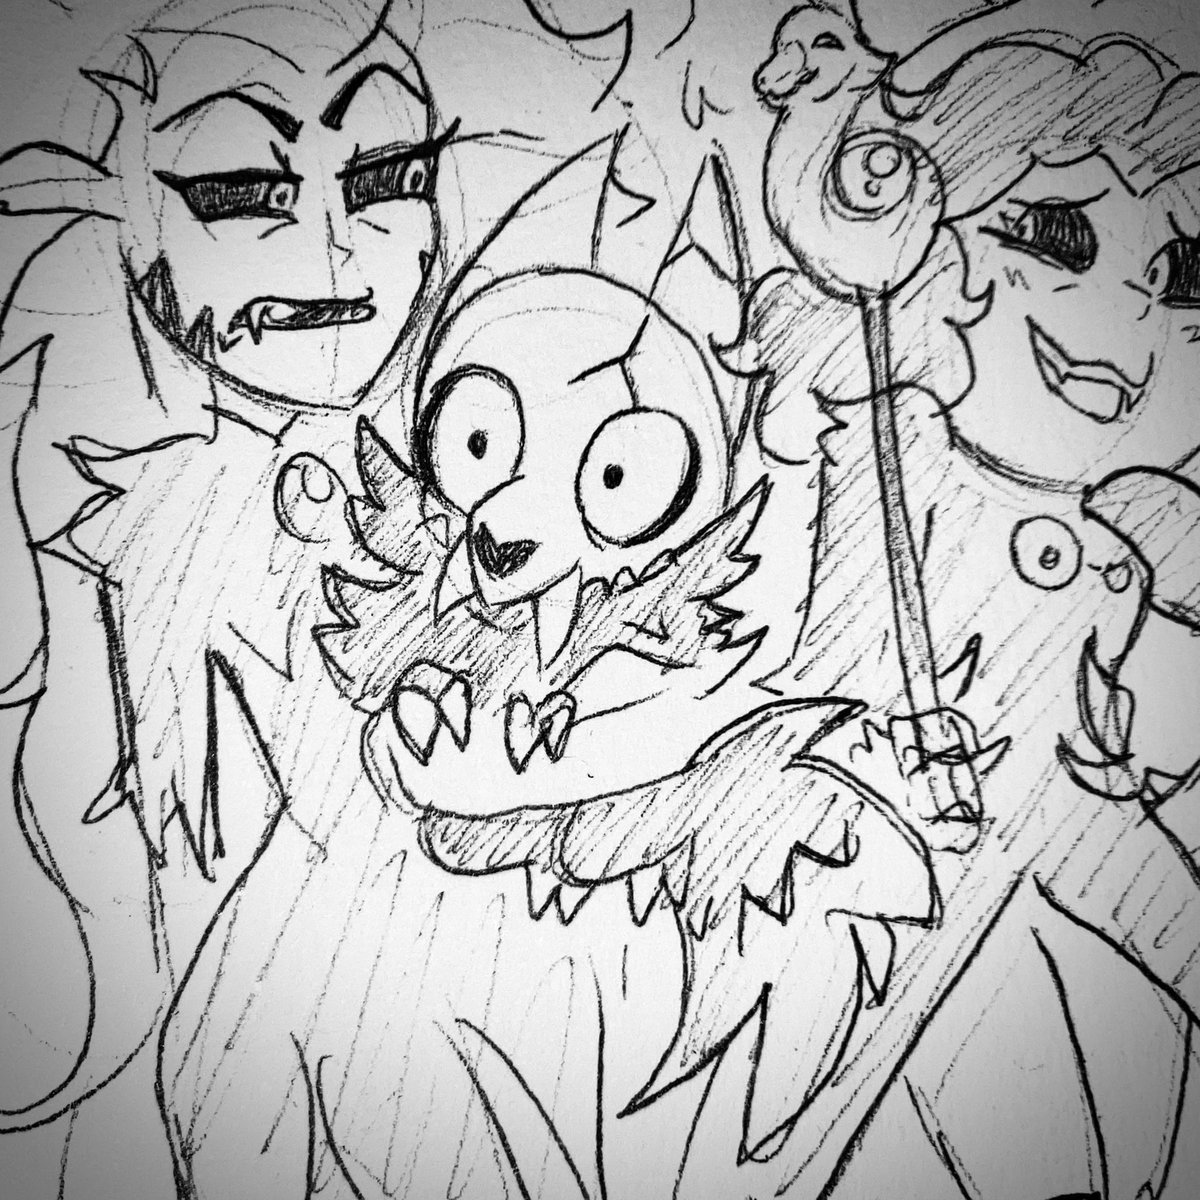 ☀️✨🦉🏠🌙
Doodles from the perfect finale of TOH and I’m still so broken 💔
(IM BACK)
Oh my pen totally hates me for all these dark drawings xD
#TOH #TheOwlHouse #WatchingandDreaming #WAD #Finale #Luz #Eda #King The finale was perfect I have so many doodles to share 💖